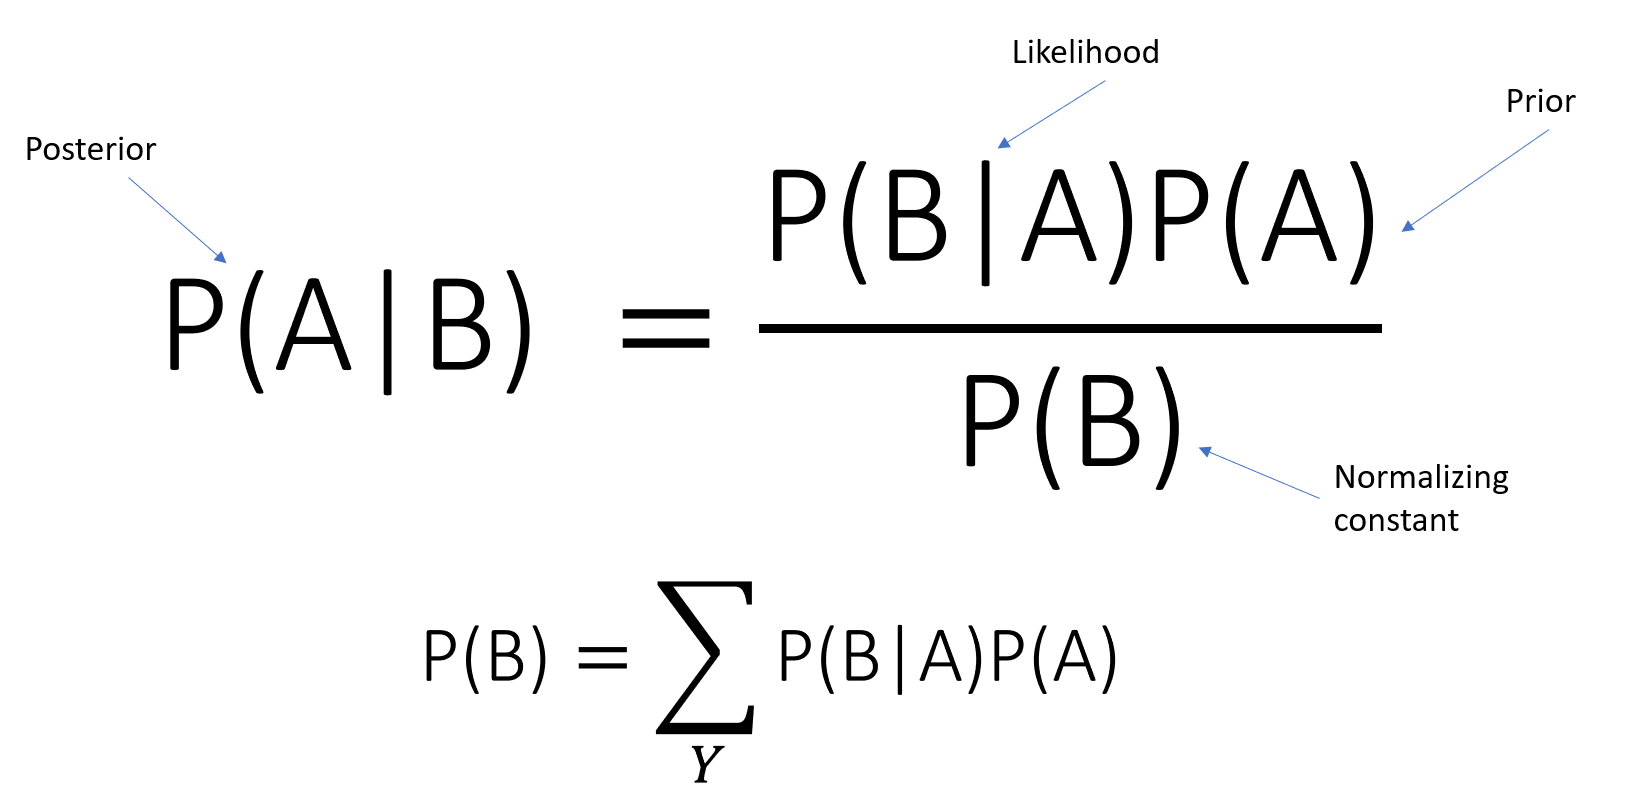 Bayes_Rule-1.png (1627×808)